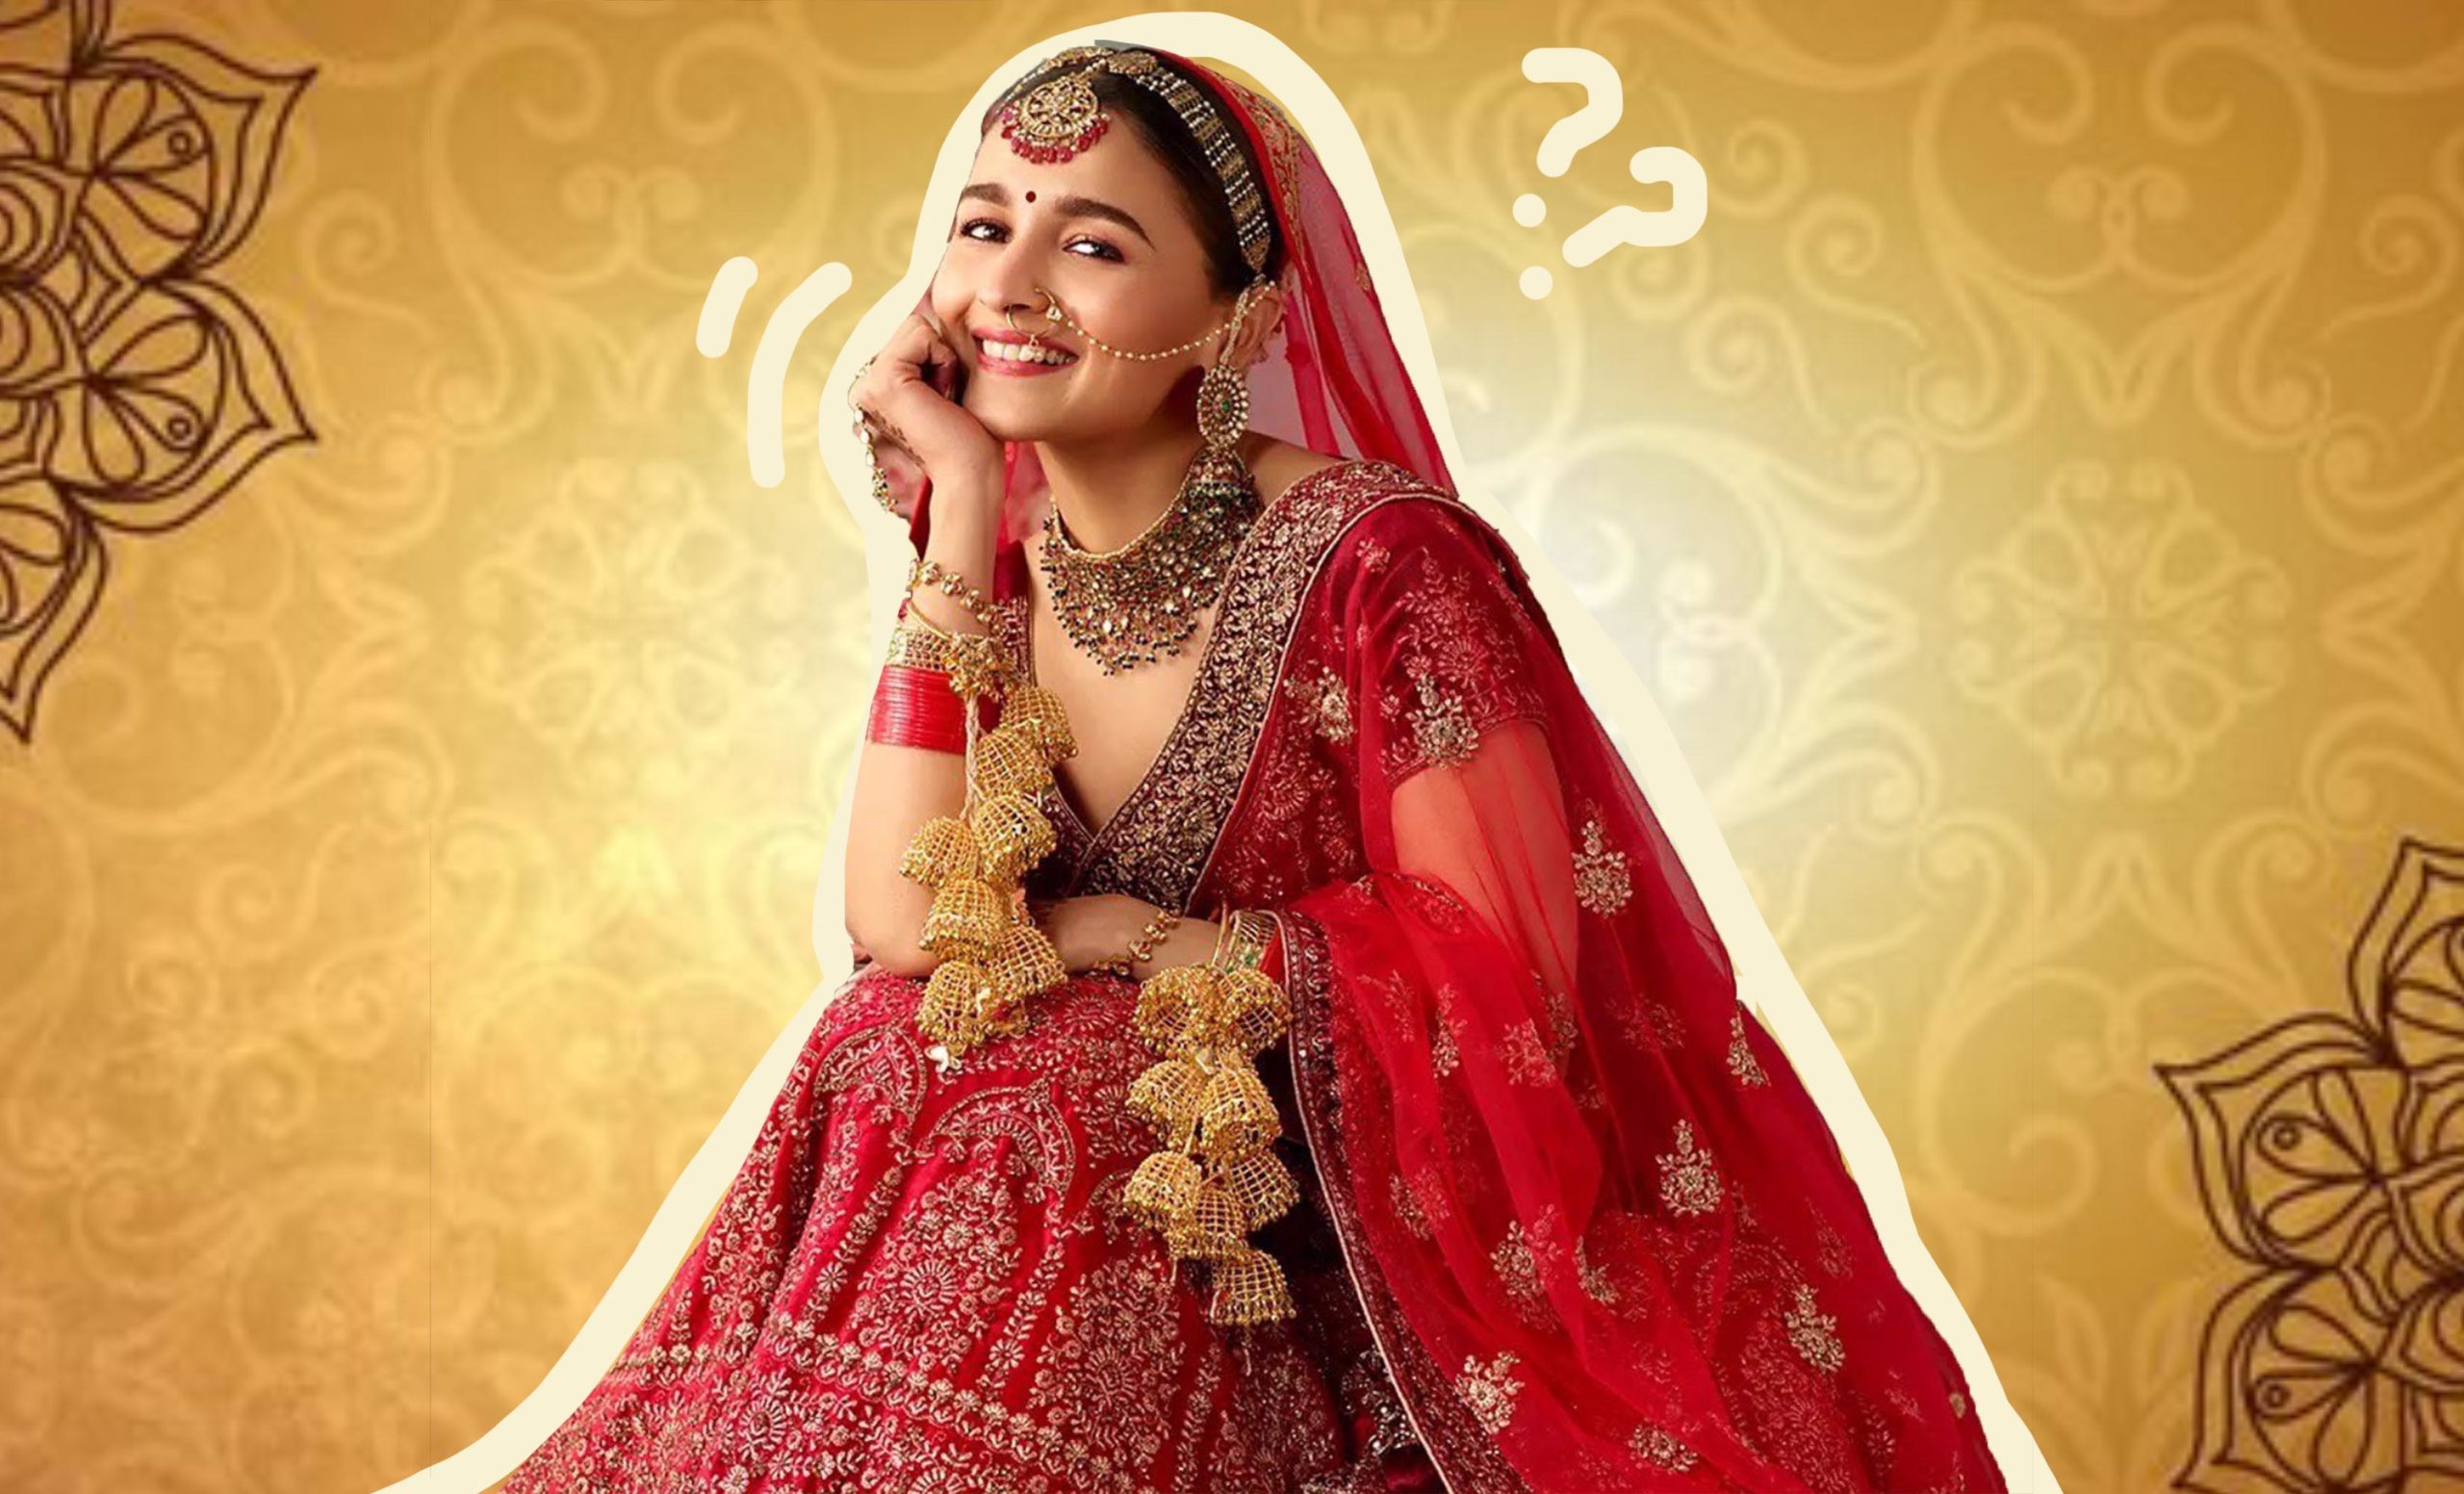 Designer Labels We’re Expecting Alia Bhatt To Wear On Her Wedding Day. Can You Guess?